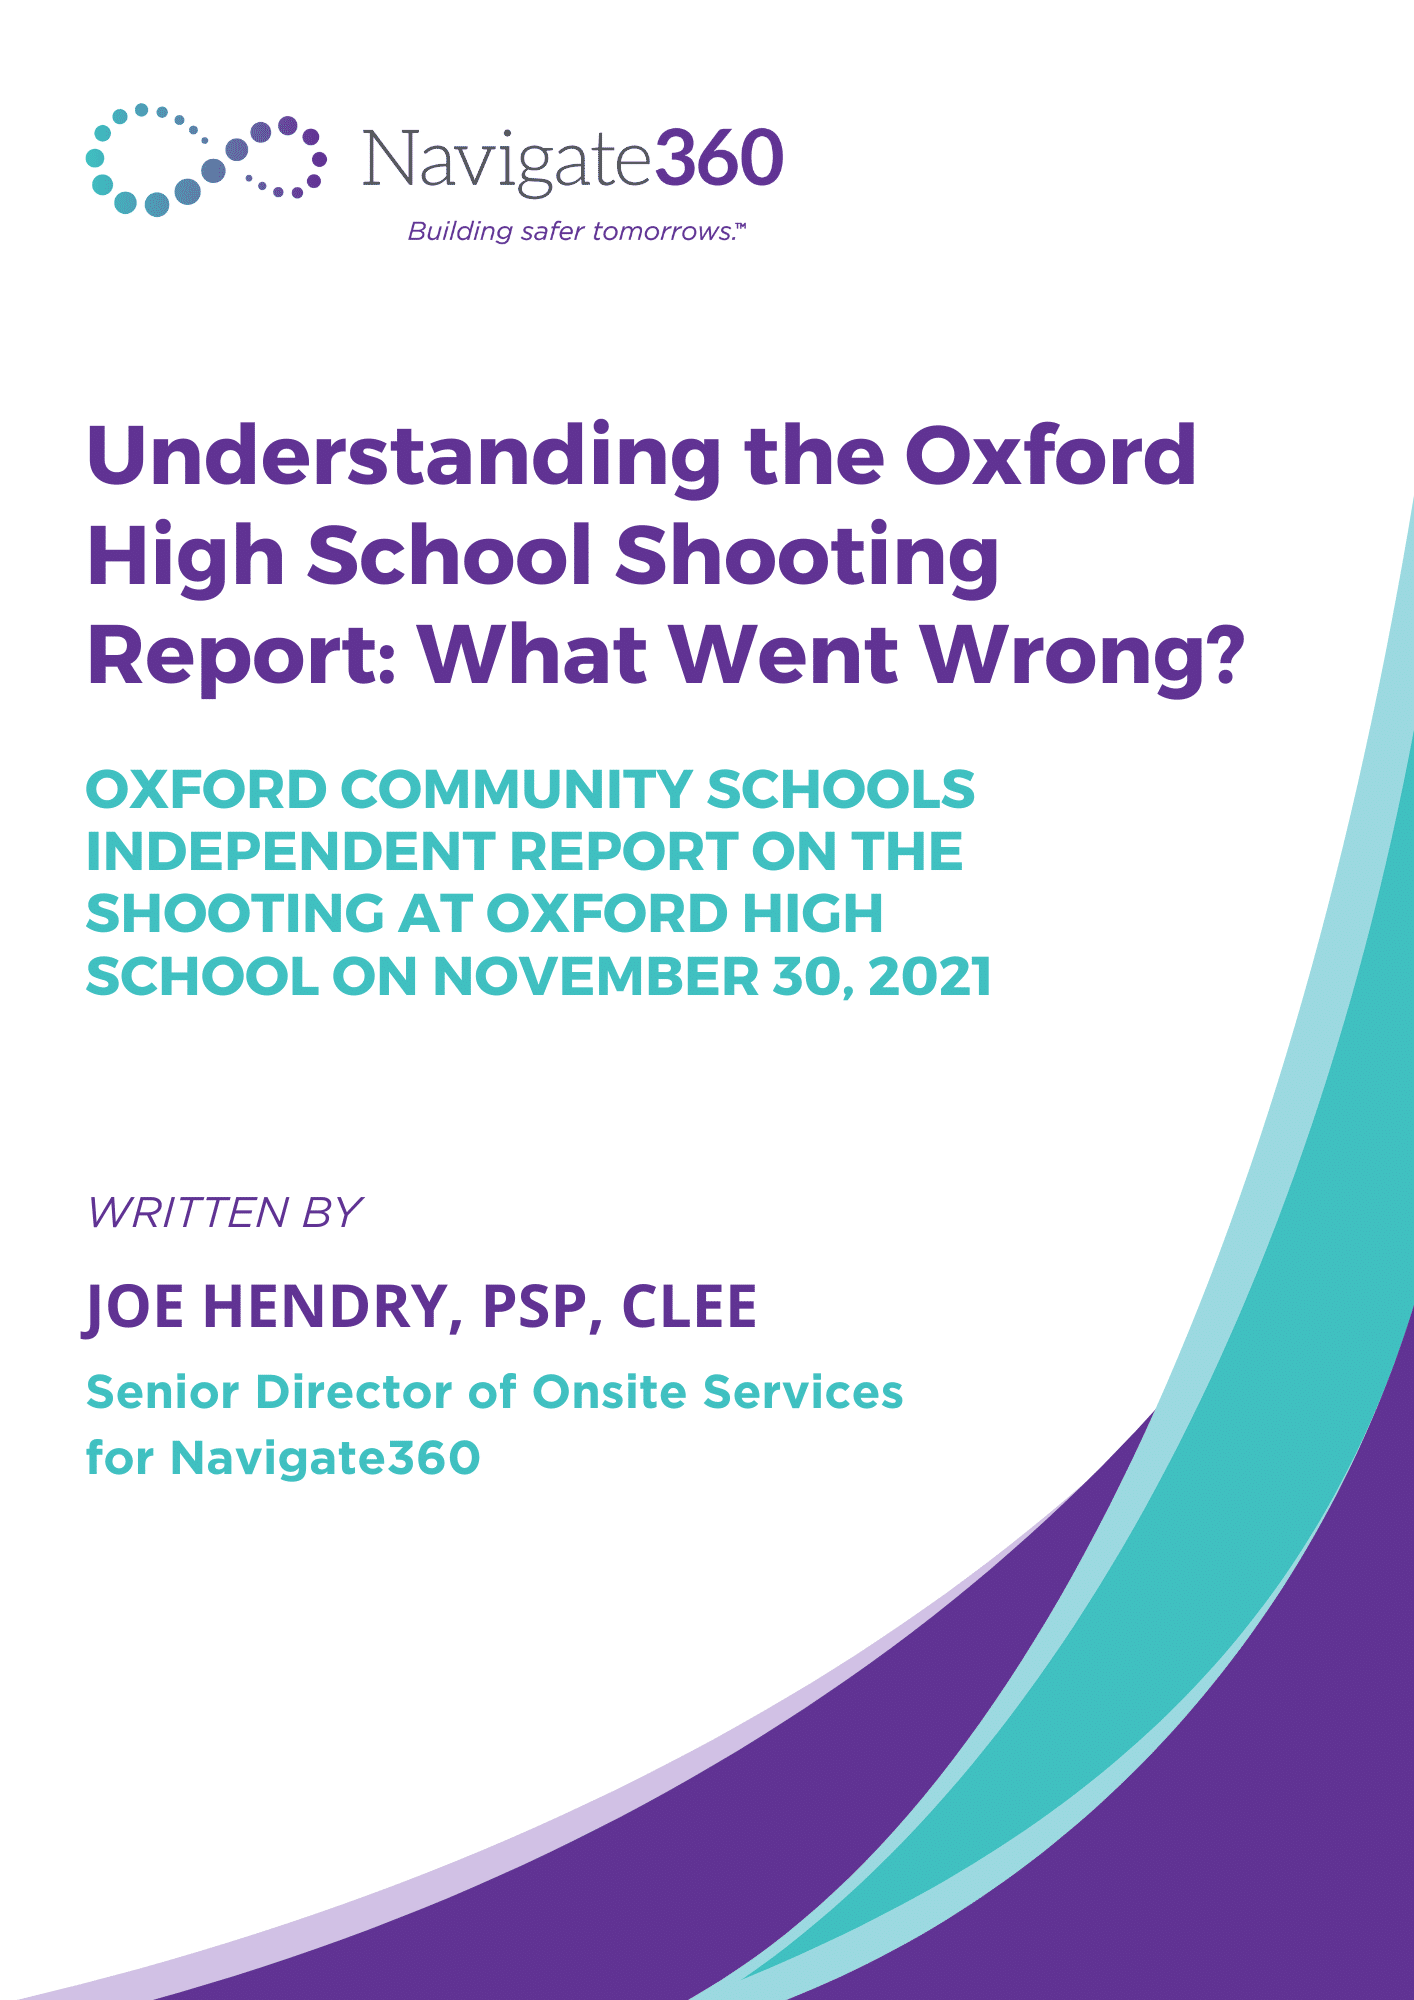 The Oxford High School Report: What Went Wrong? 